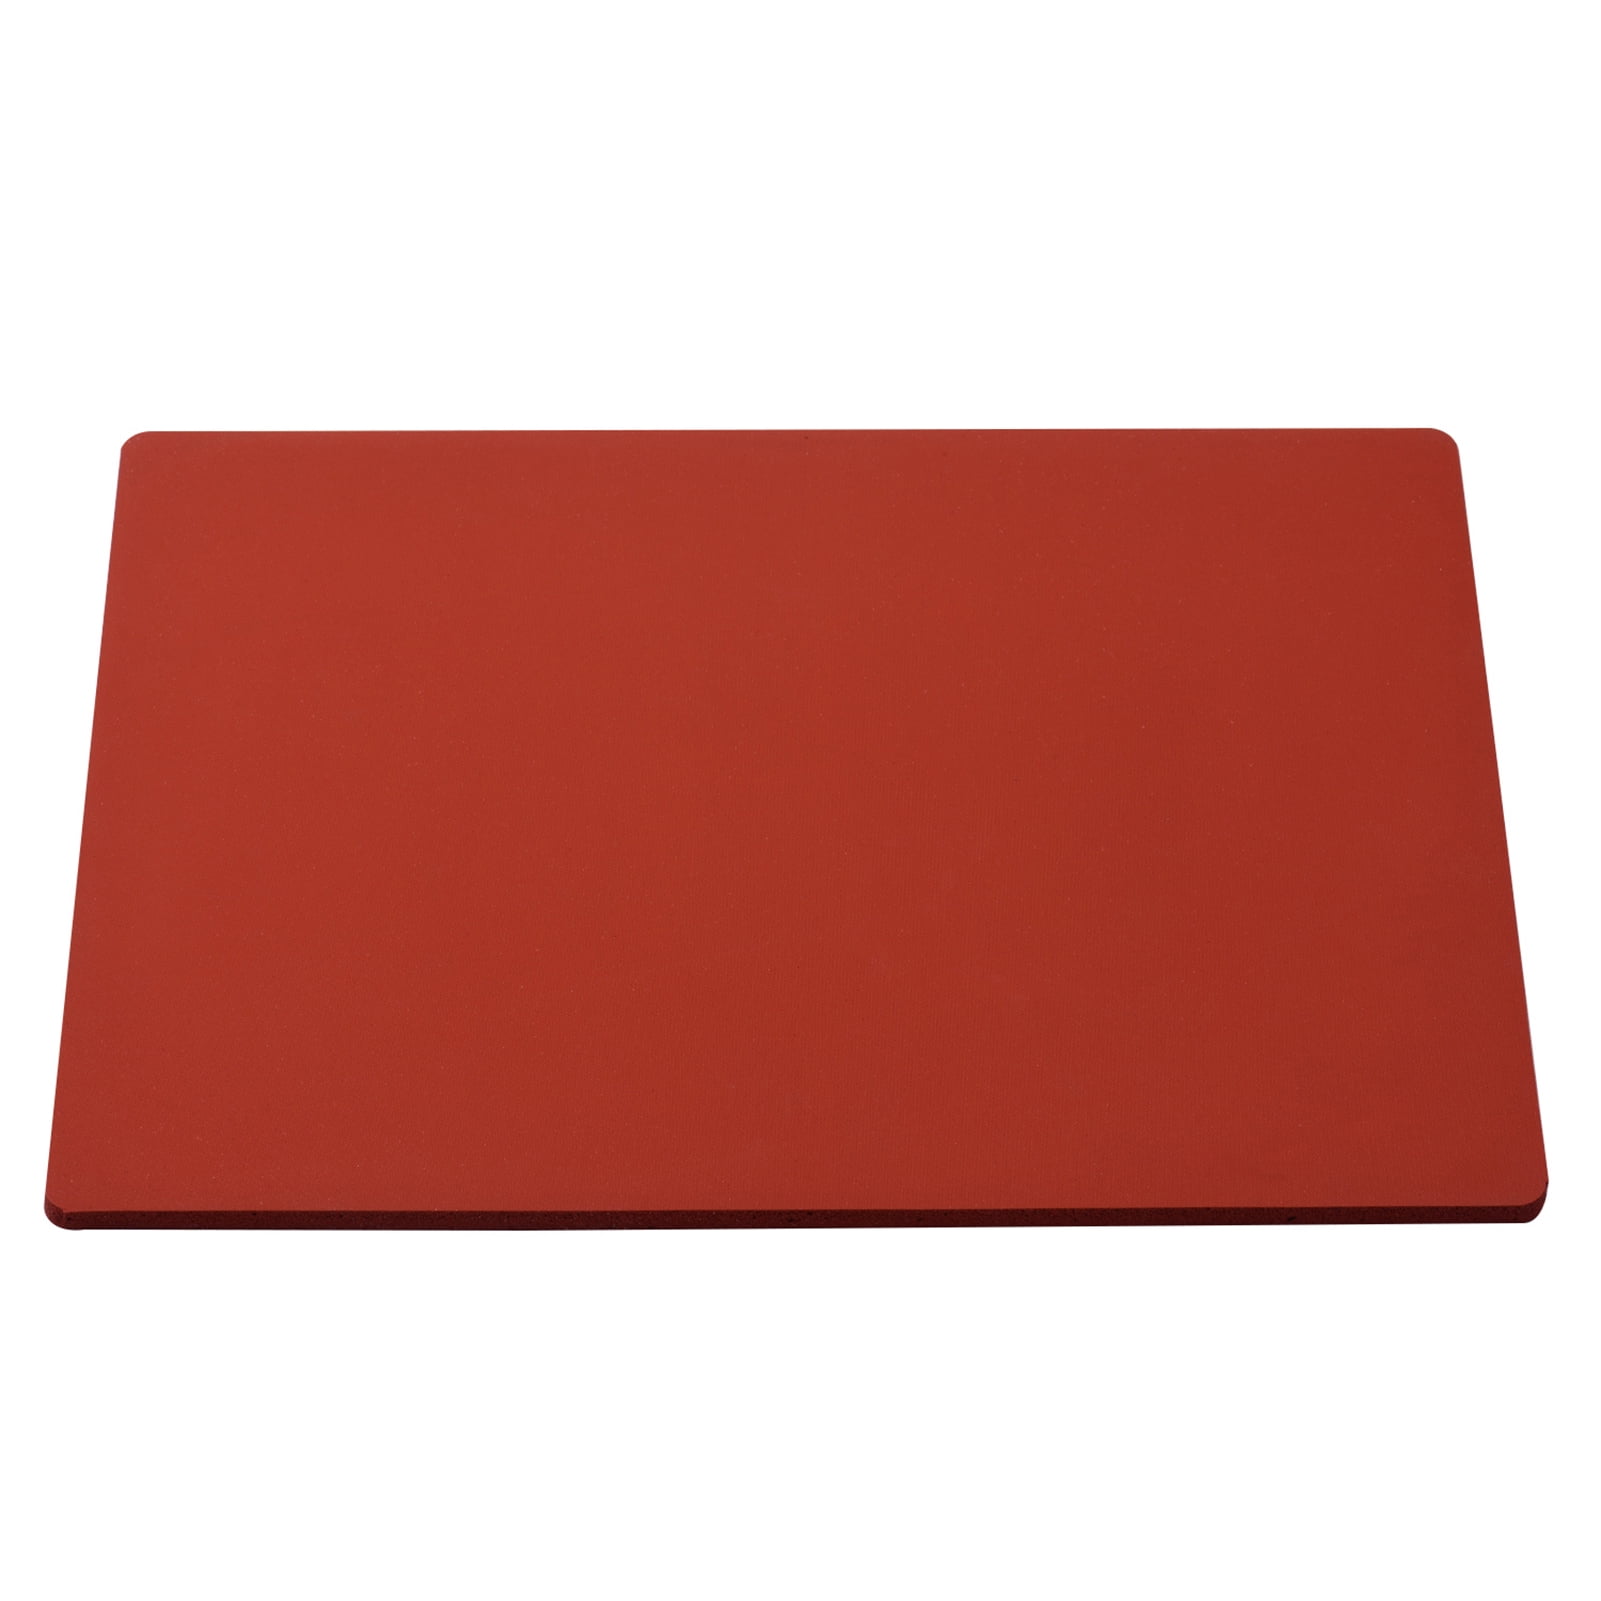 New 16x24" silicone rubber pad mat for t-shirt heat press sublimation transfer 